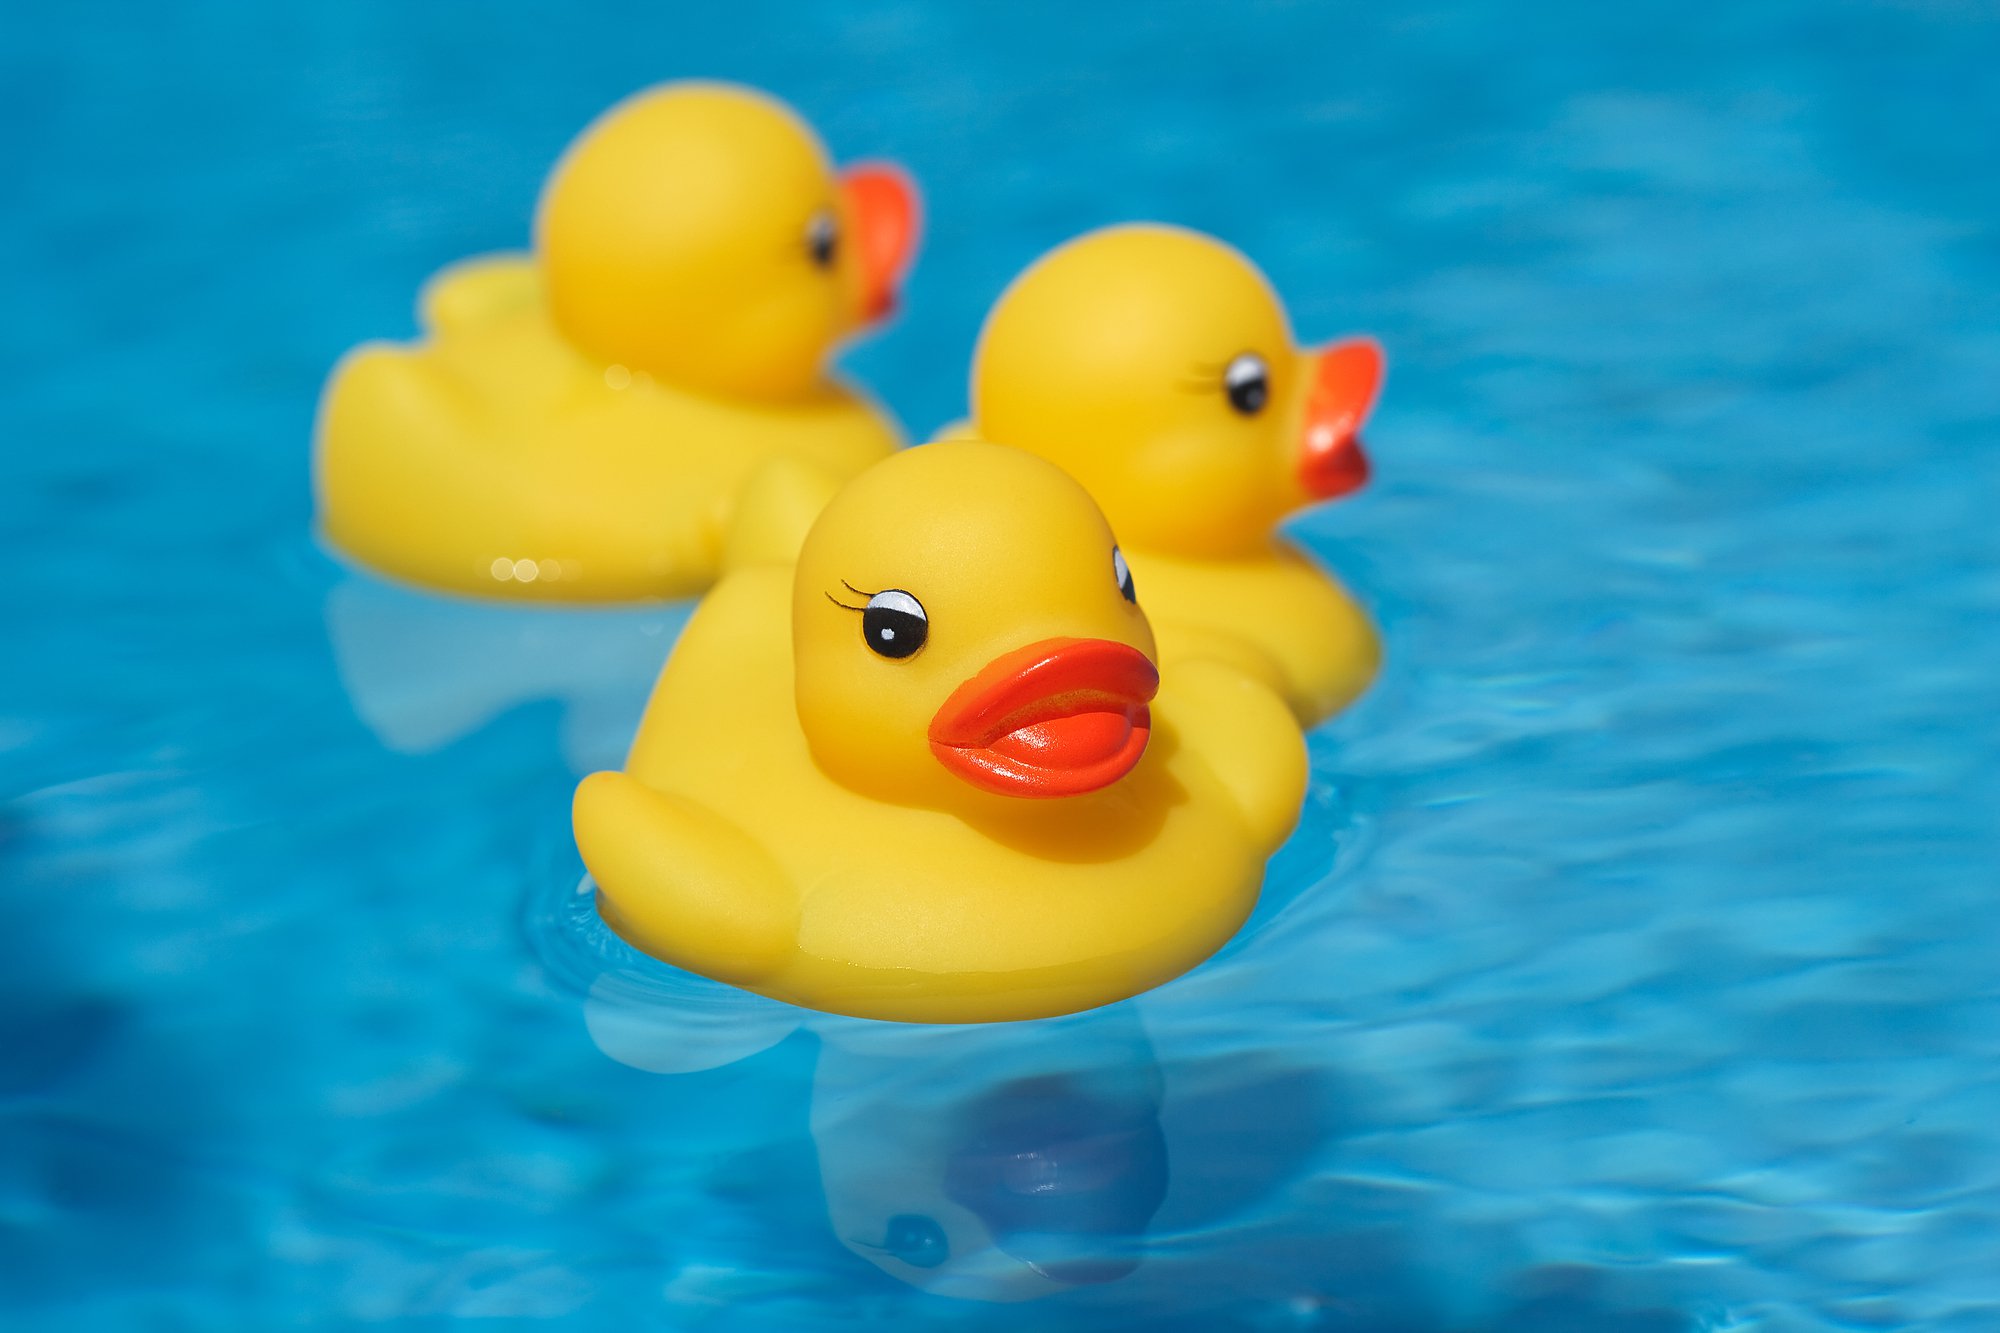 rubber-ducky-may-not-be-the-friend-we-thought-he-was-kids-first